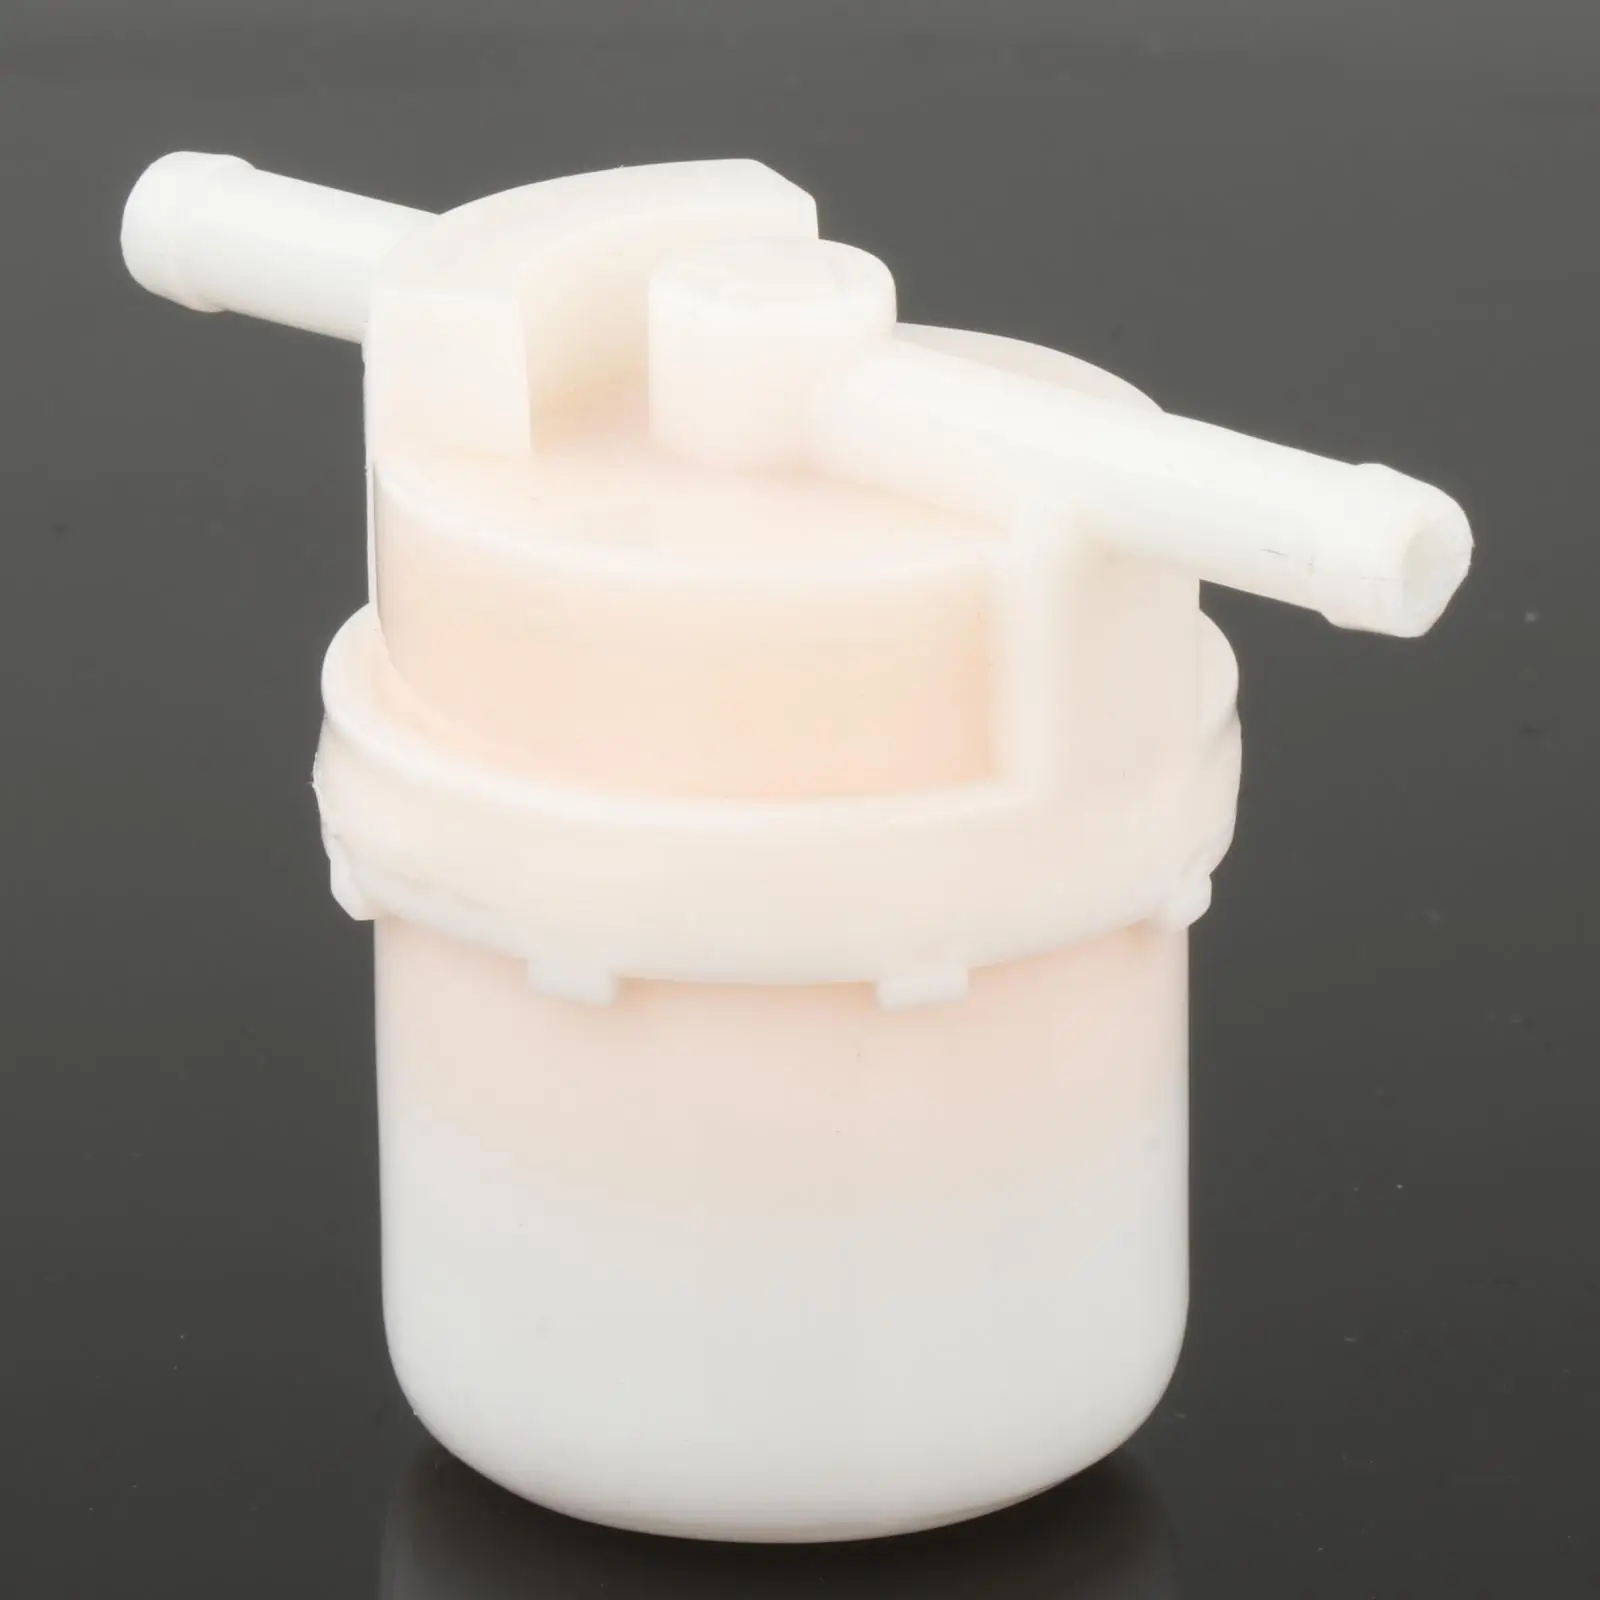 Fuel Filter 16900-Sa5-004 Direct Replaces Fits for Outboard Parts Spare Parts